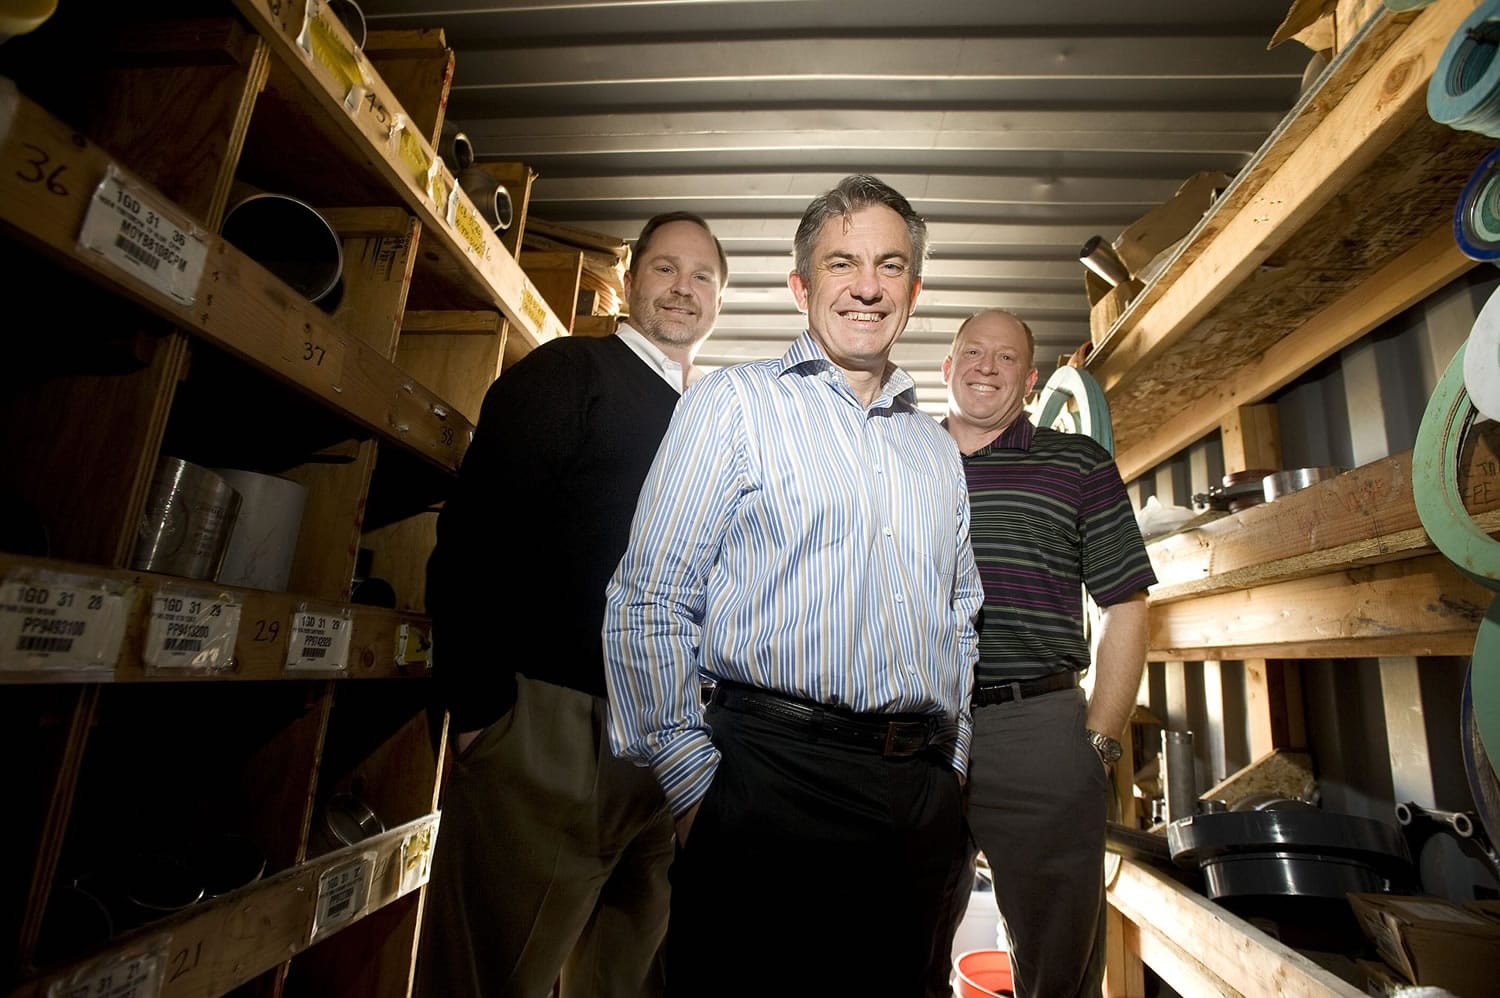 Phoenix Industrial's managers, from left, Vice President Ken Johnson, President Joe Hutton, and Vice President Jon Scott, launched the company in 2001 -- a challenging time to be in business.